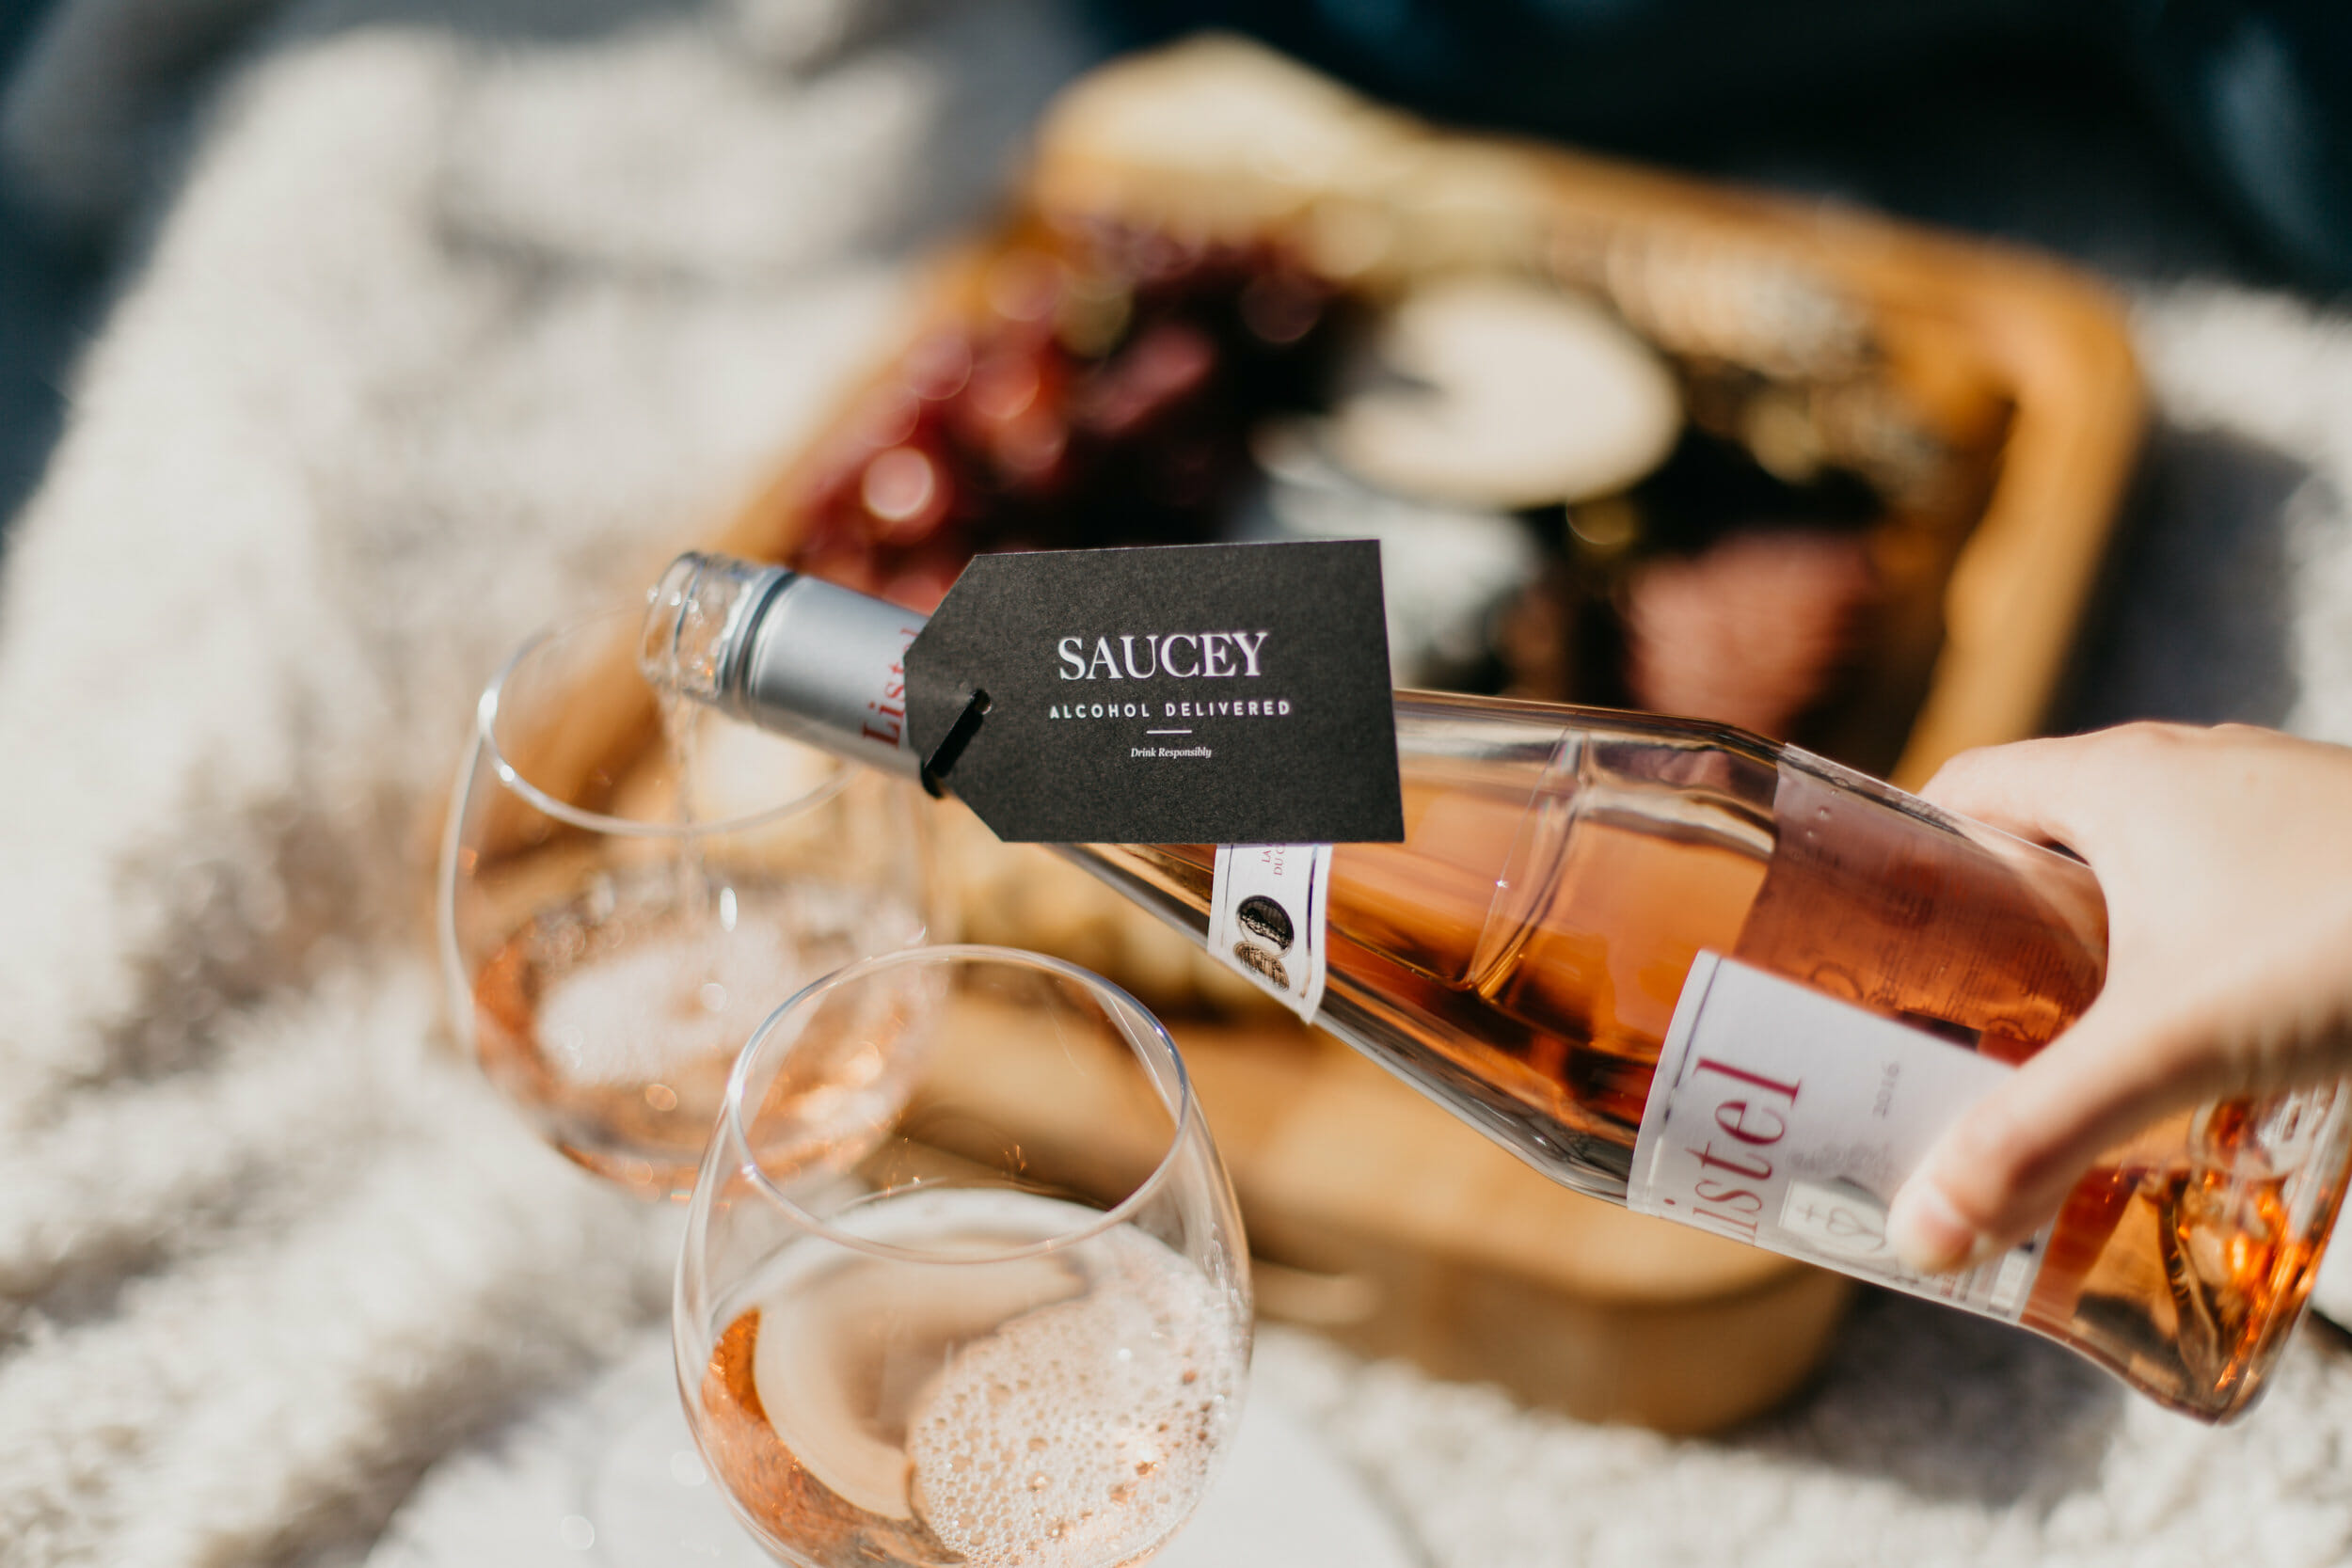 SAUCEY: Saucey has the fastest alcohol delivery near you. No order minimums + free delivery on 30-min orders. Get beer, wine, and liquor near you delivered.